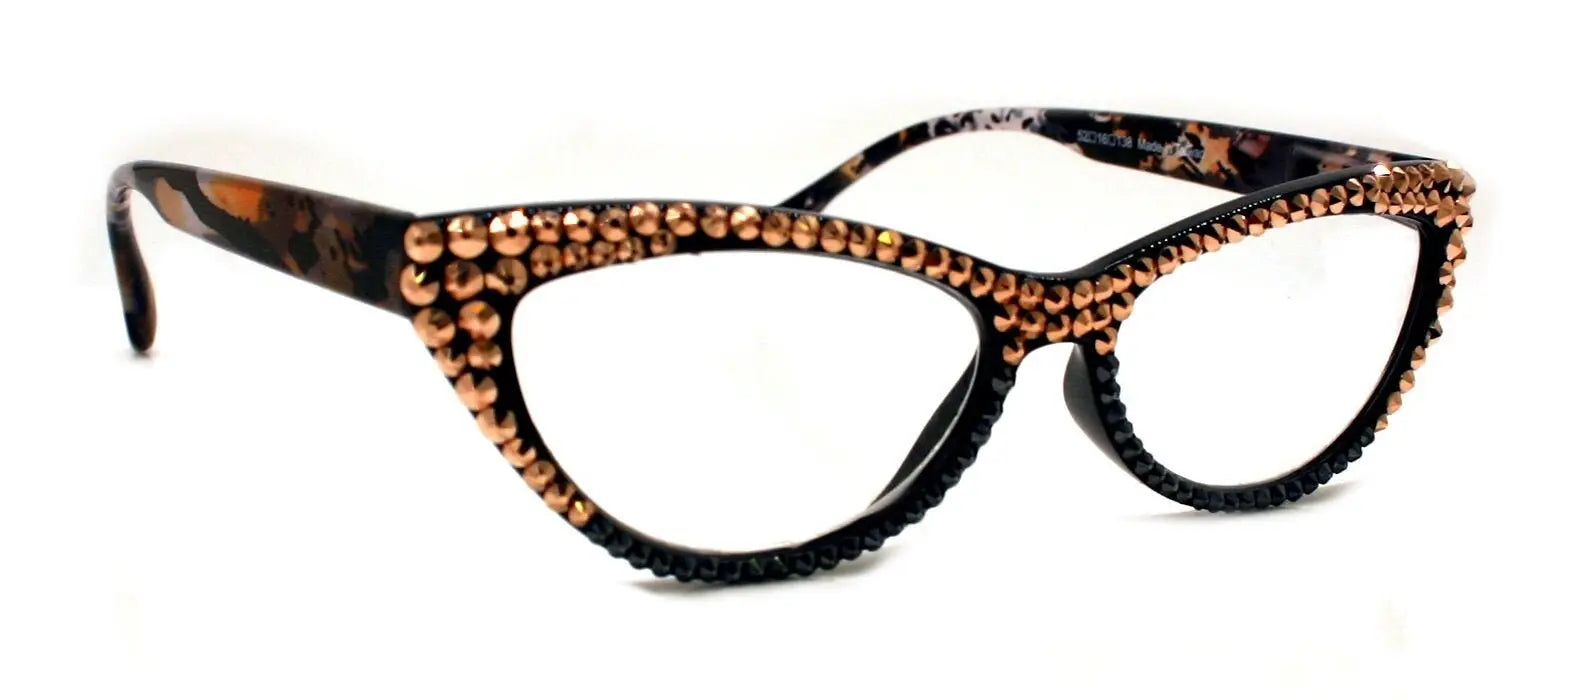 Lynx, (Bling) Women Reading Glasses W (Full TOP) (Rose Gold) Genuine European Crystals, Cat Eye, Tiger Print , NY Fifth Avenue. 